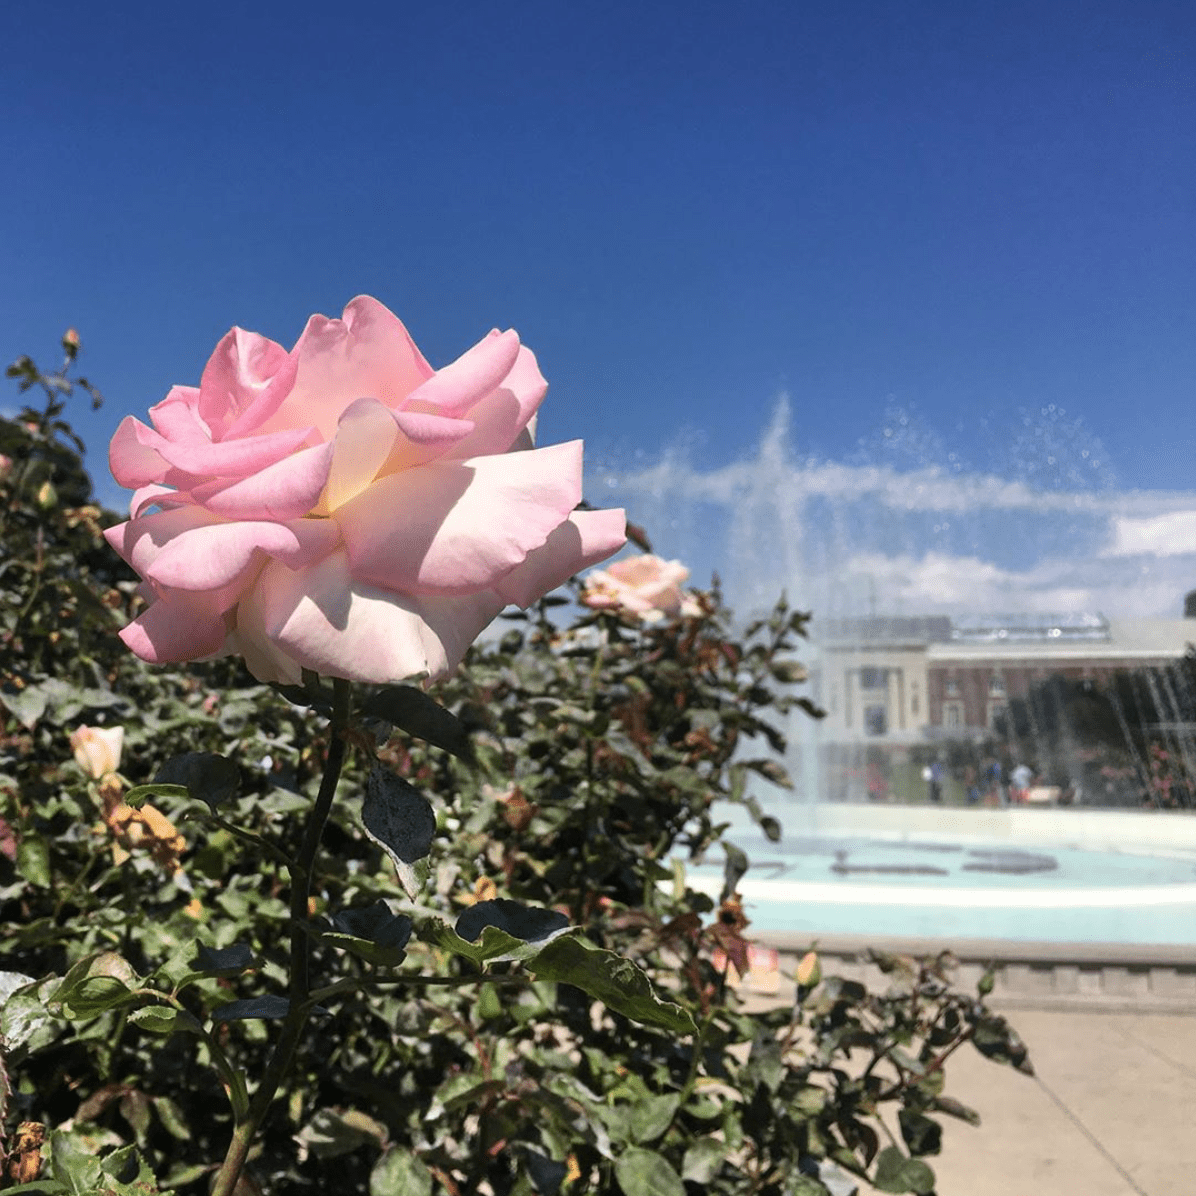 A rose in front of a fountain. - Garden